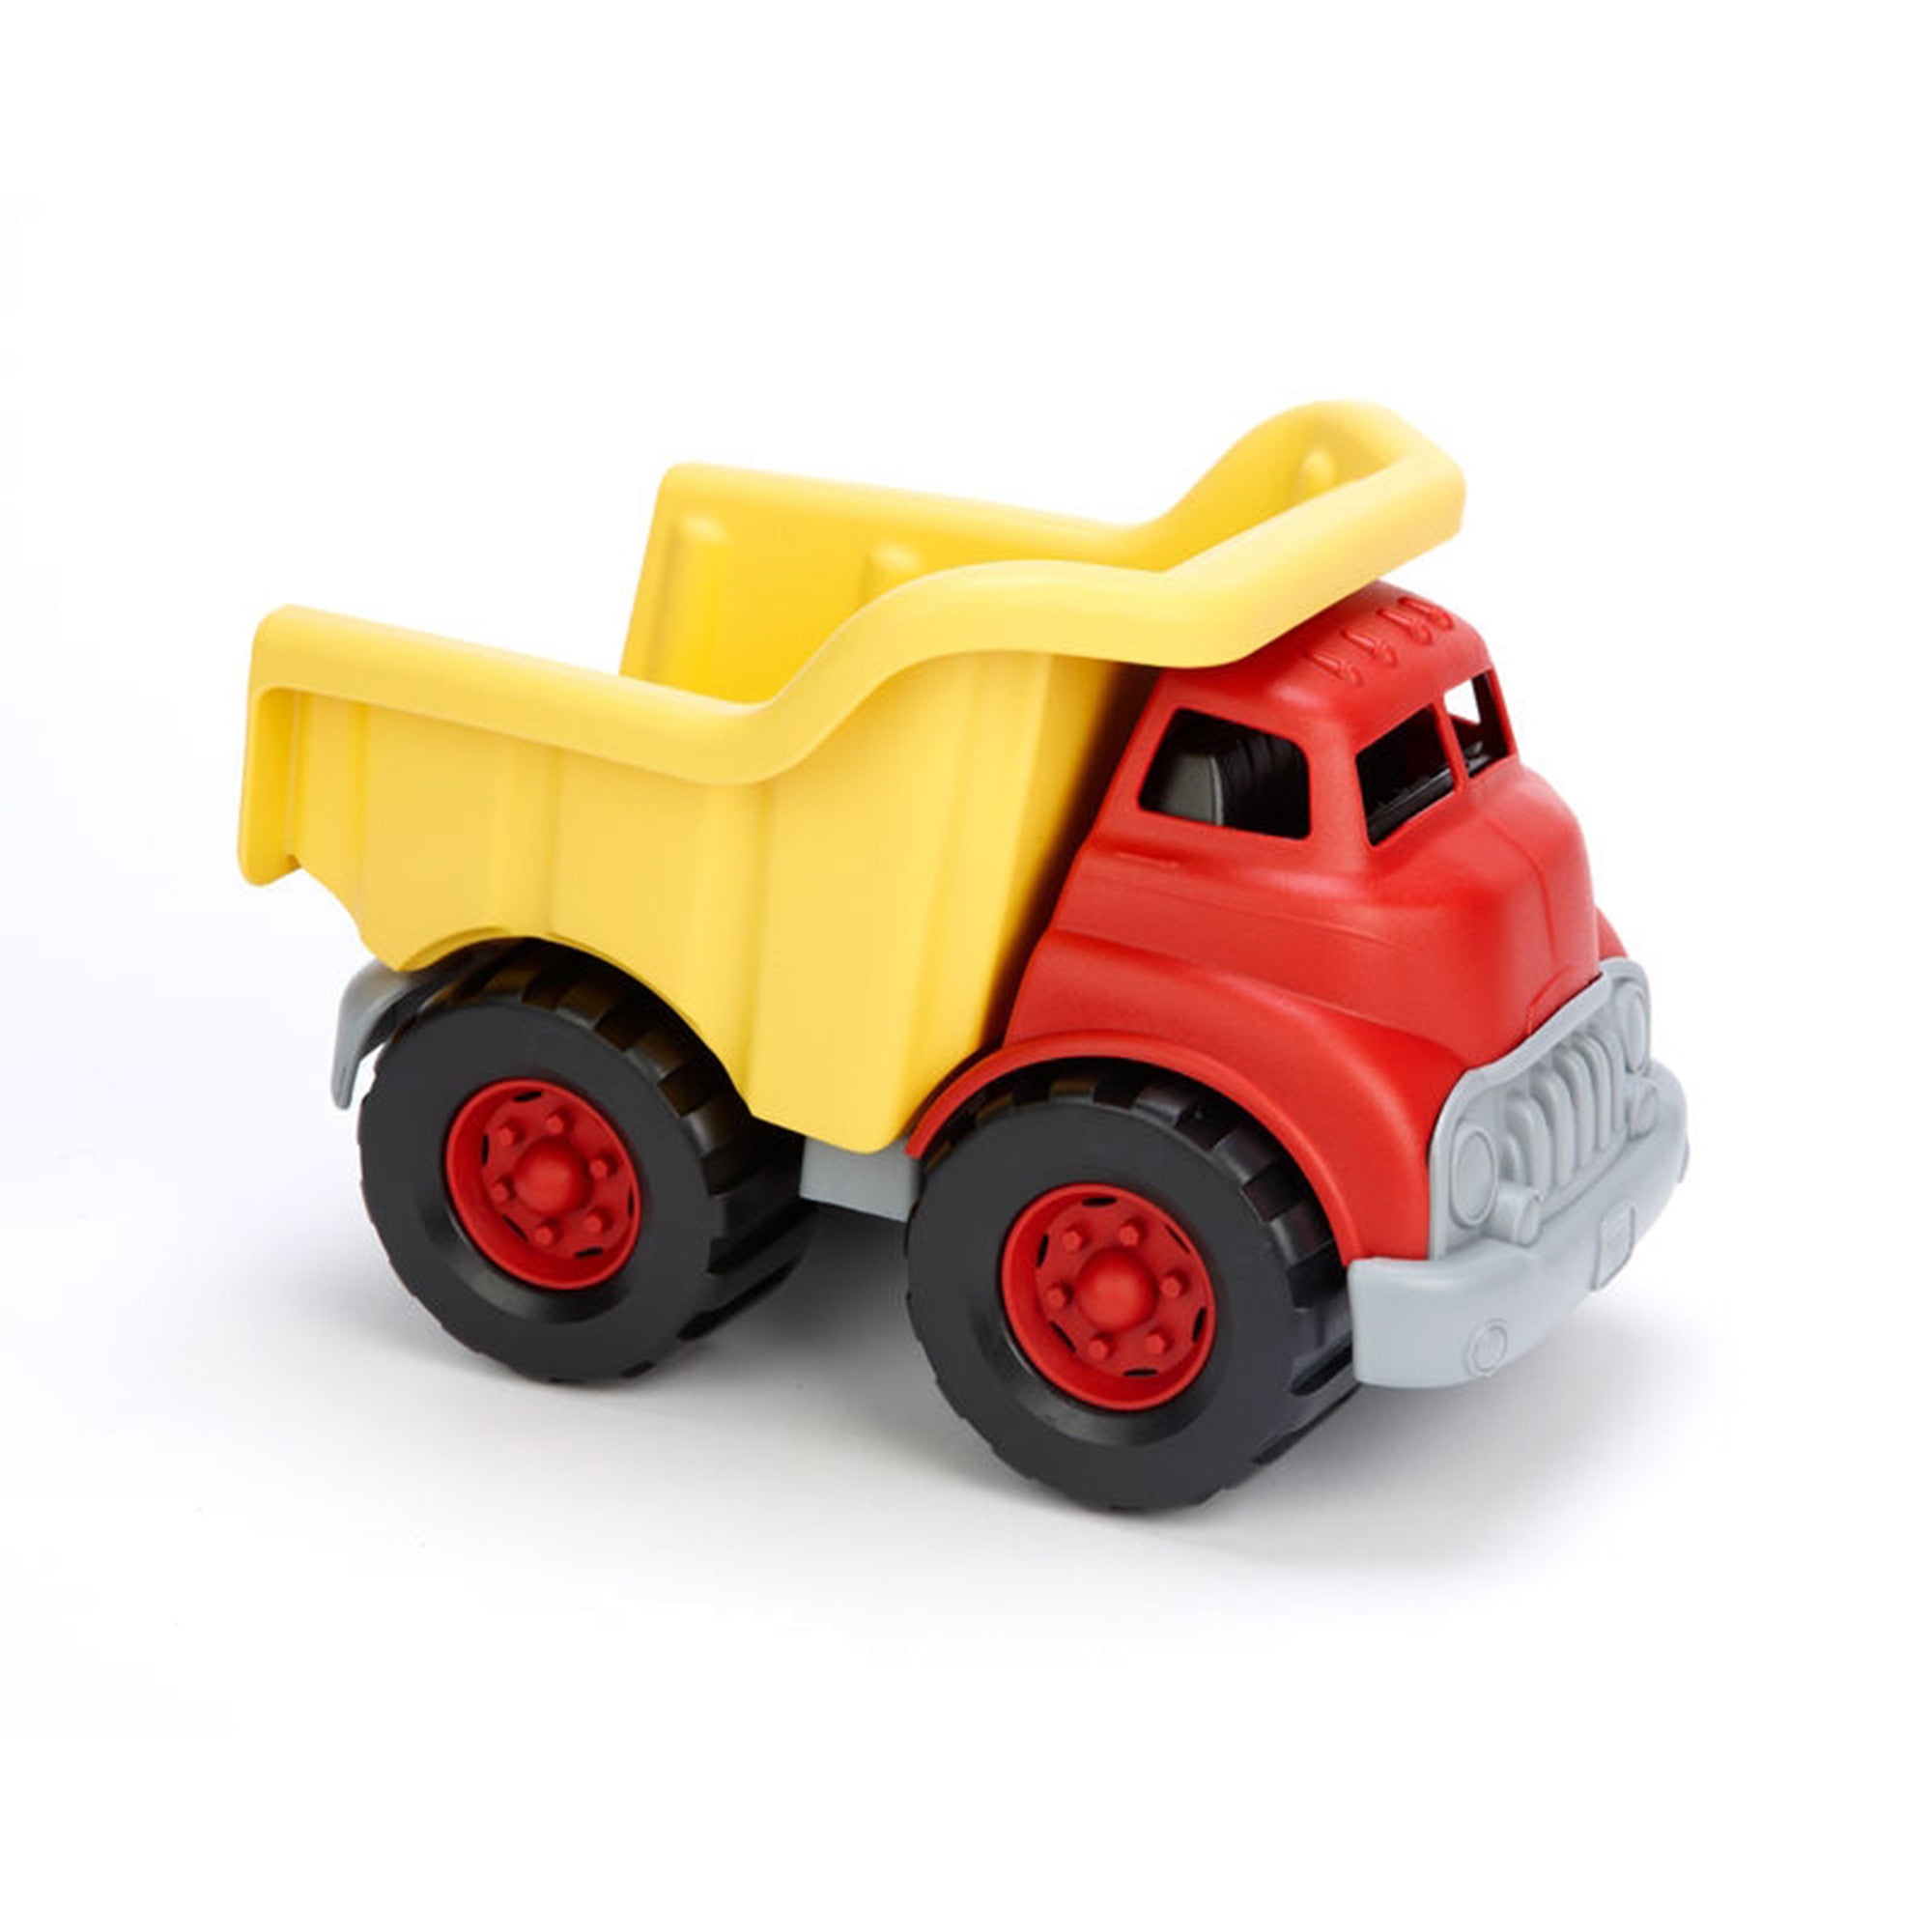 toy toy truck